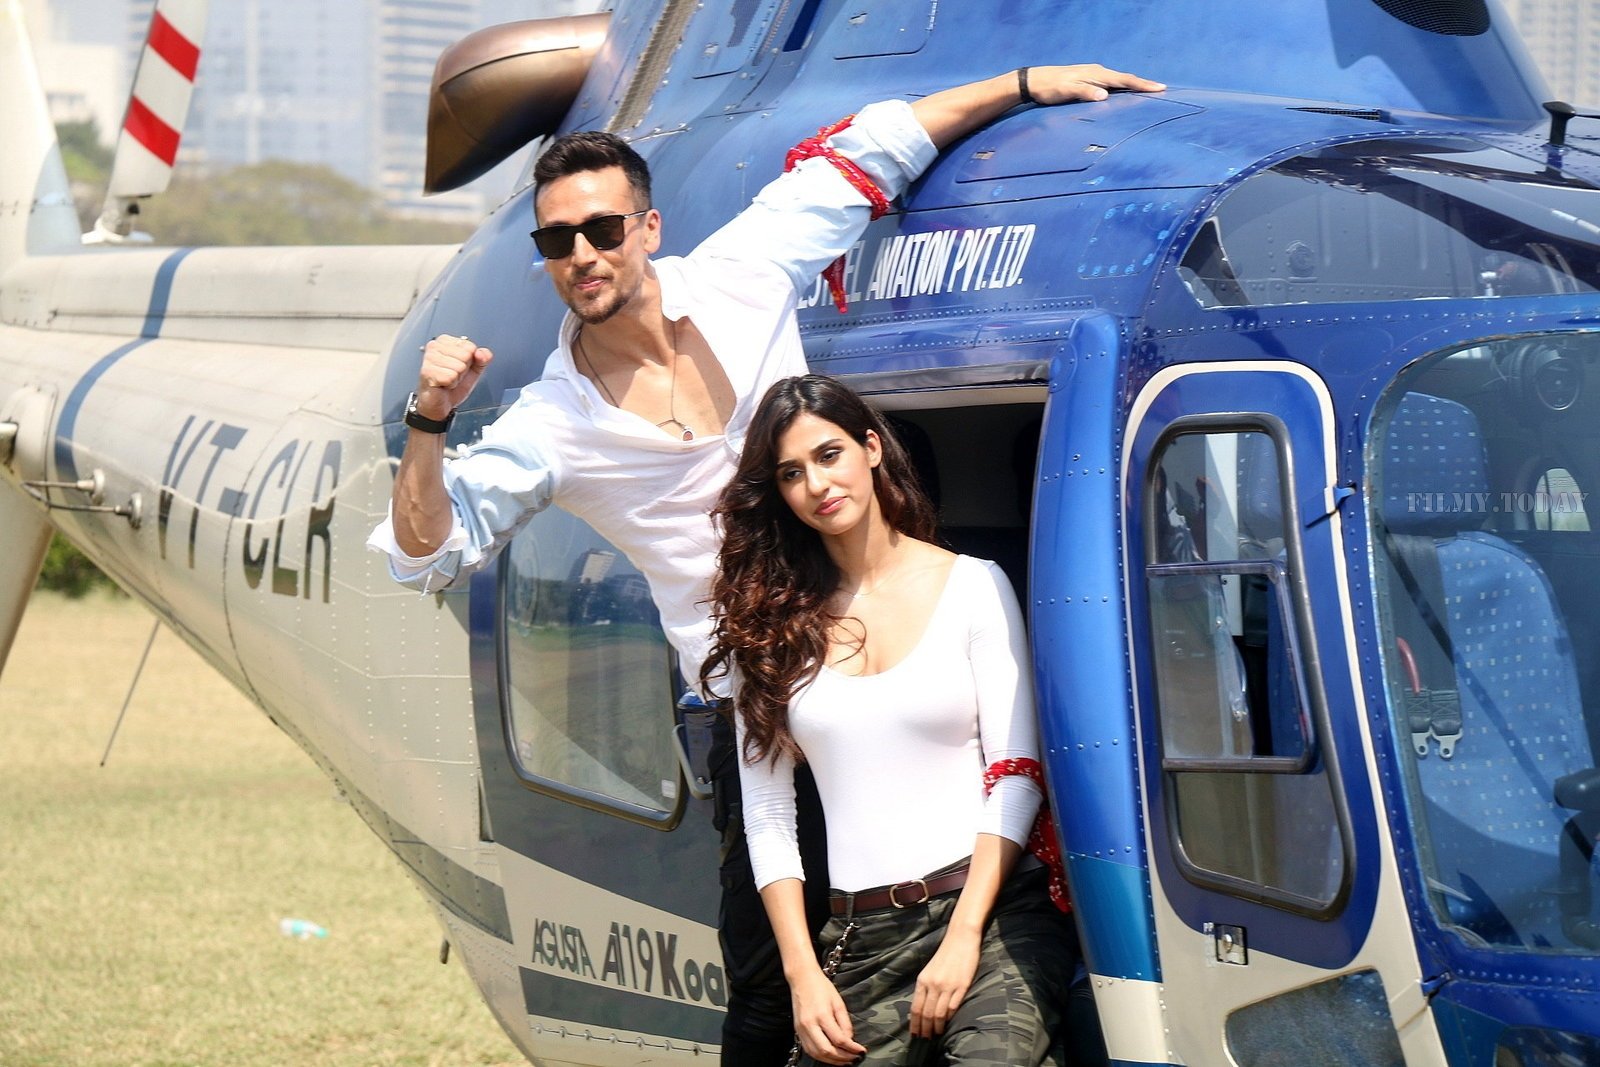 Photos: Trailer Launch Of Film Baaghi 2 With Tiger Shroff & Disha Patani | Picture 1567854